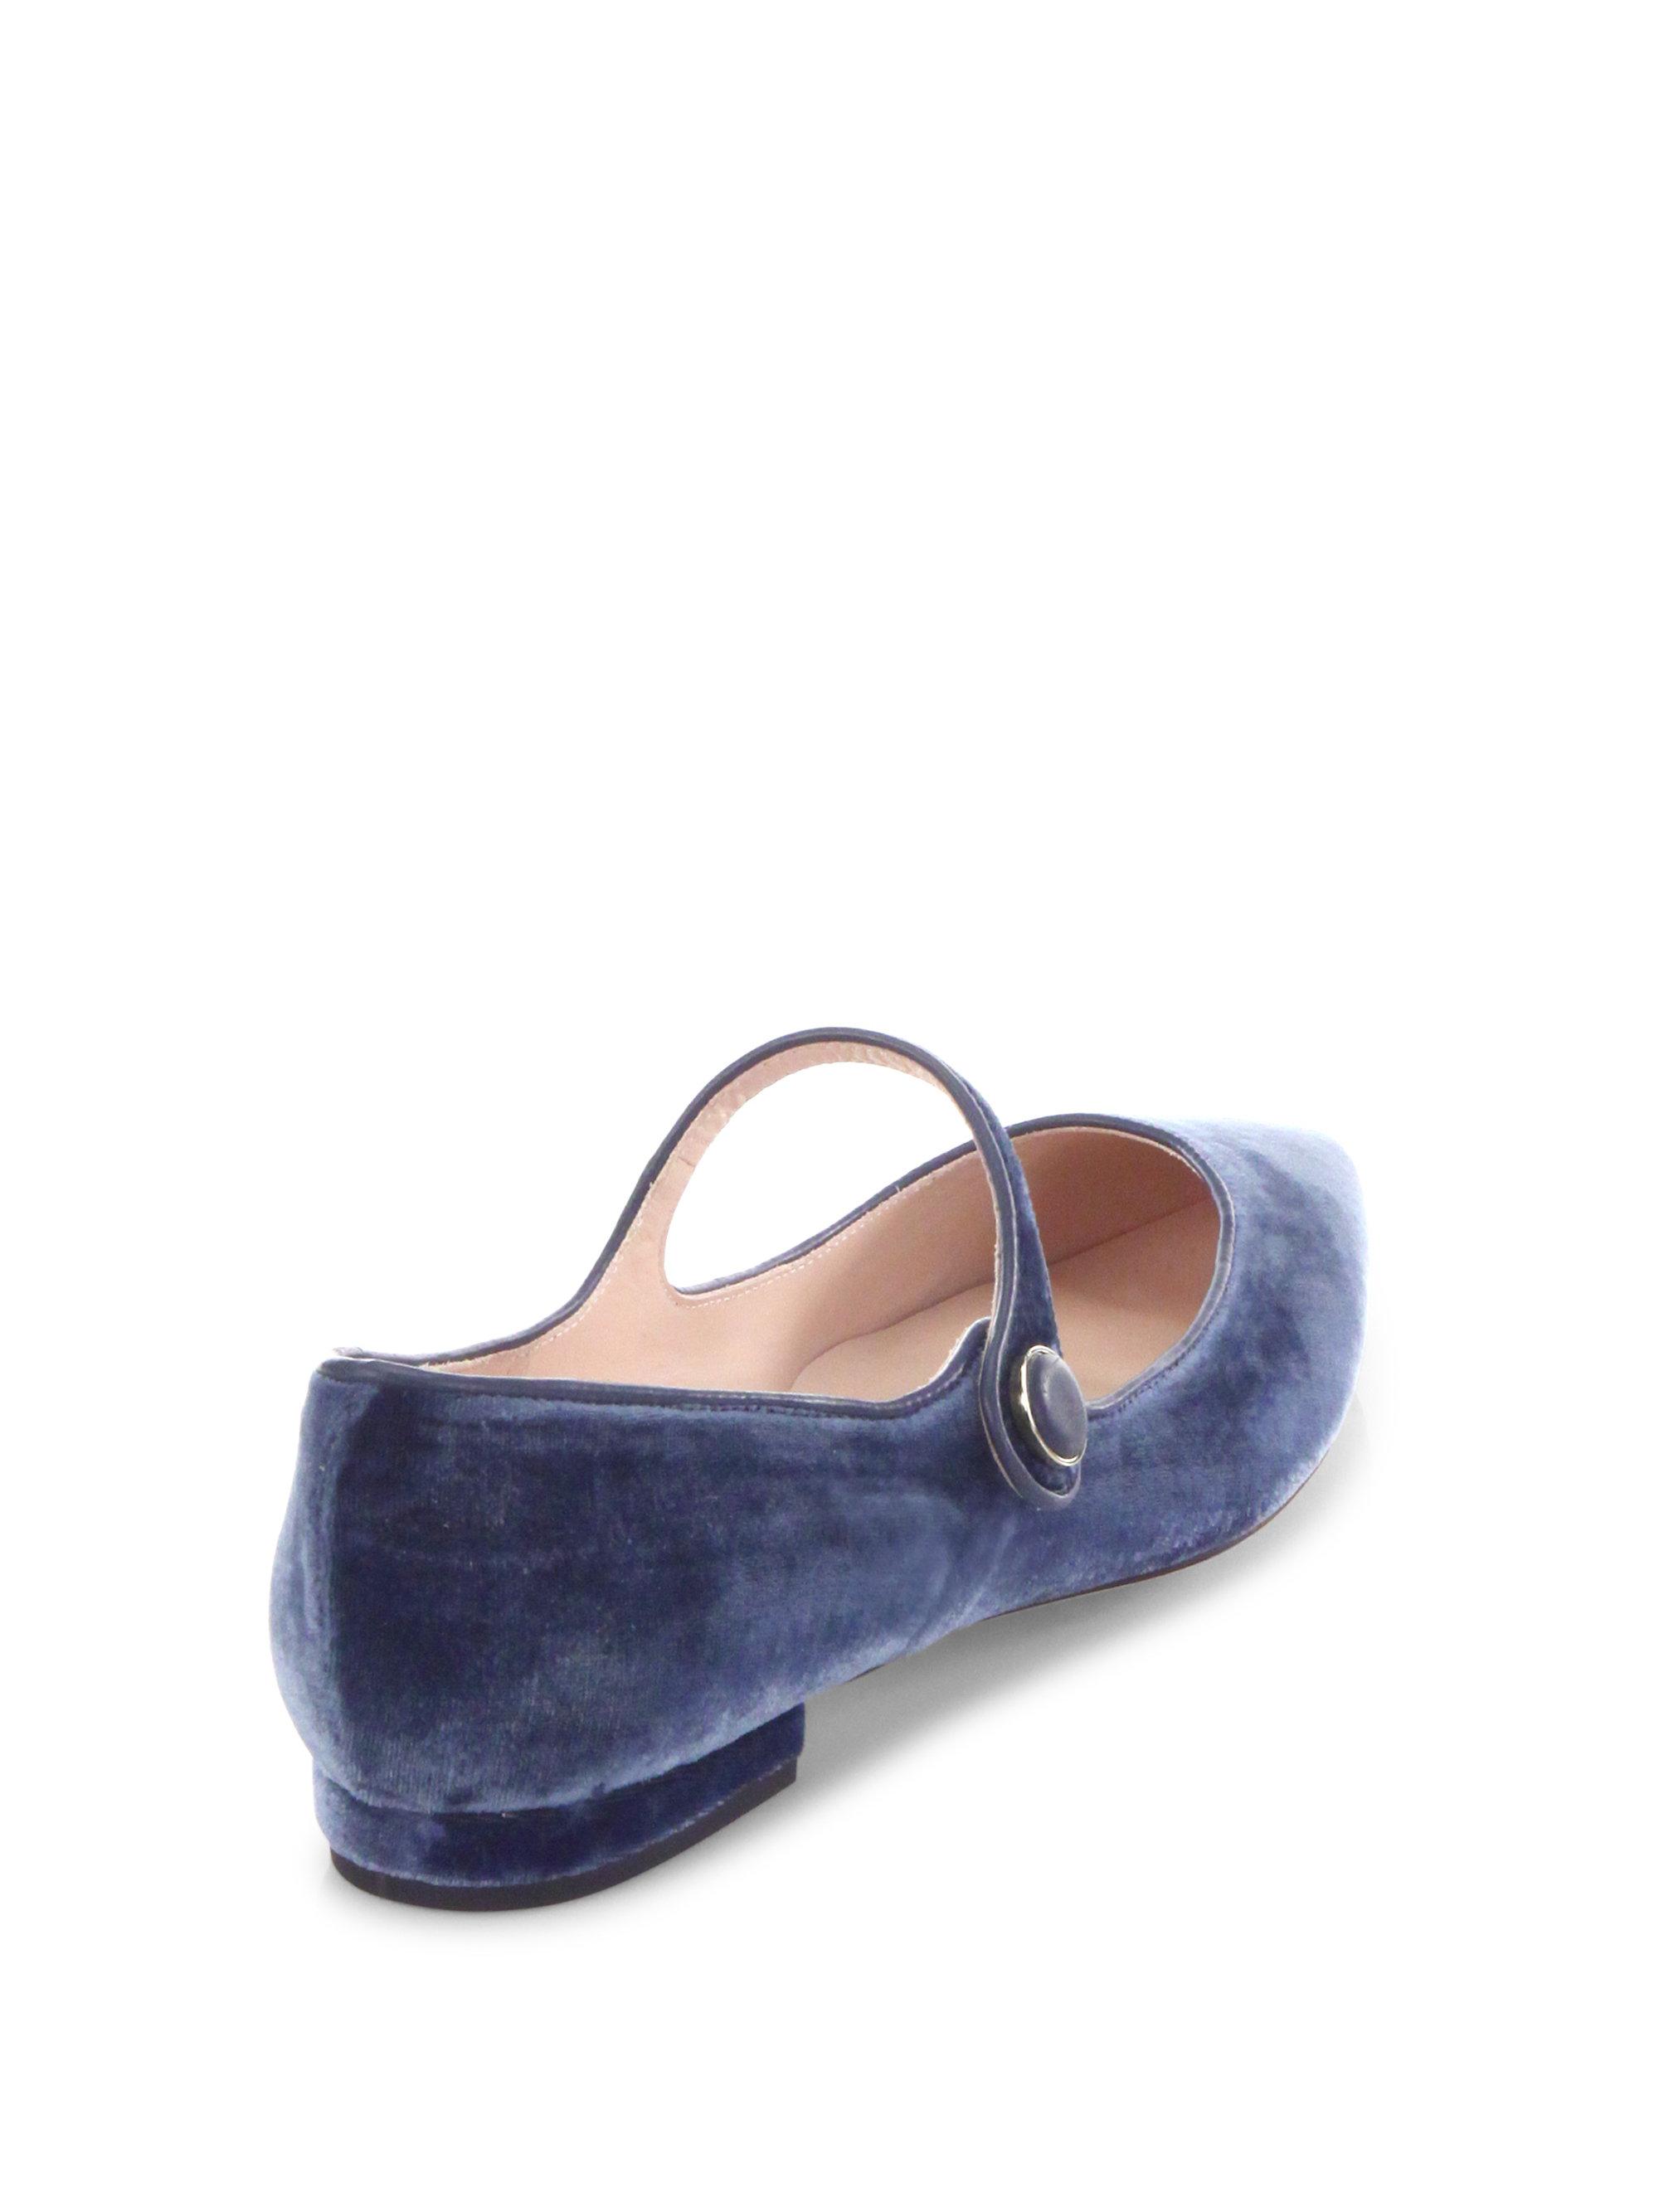 Womens Shoes Flats and flat shoes Loafers and moccasins LK Bennett Velvet Mary Jane Ultra Violet in Blue 